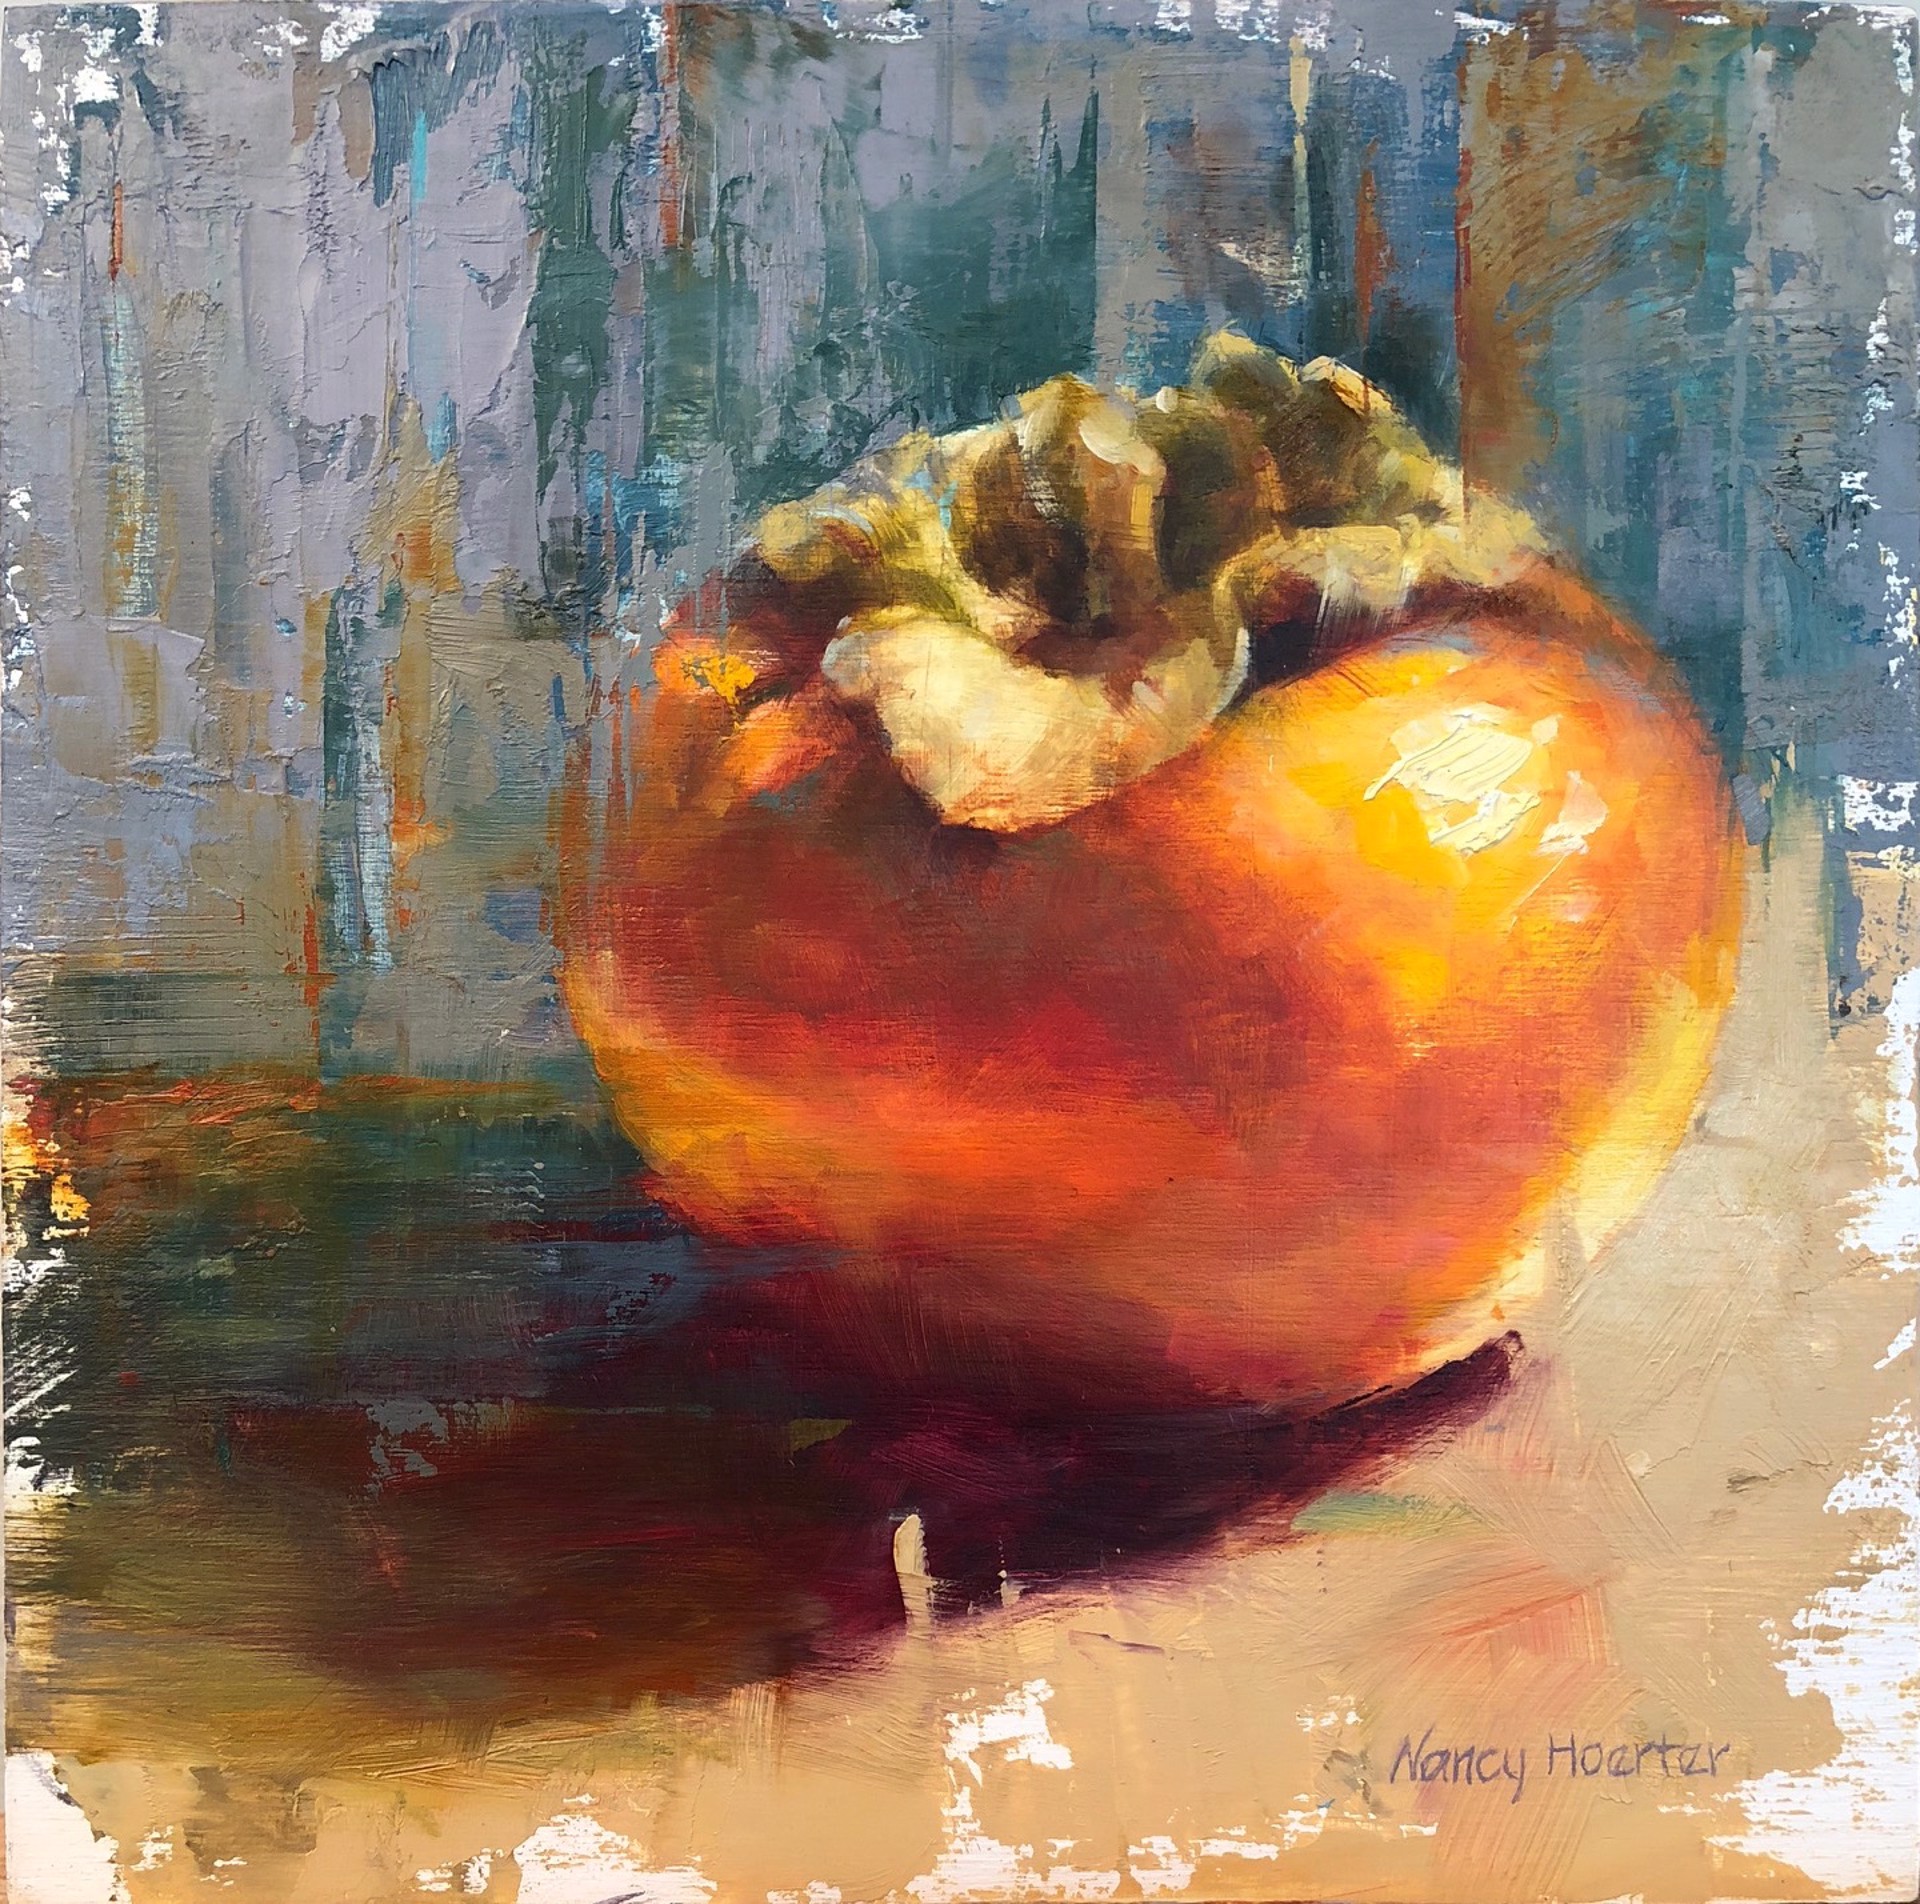 The Perfect Persimmon by Nancy Hoerter